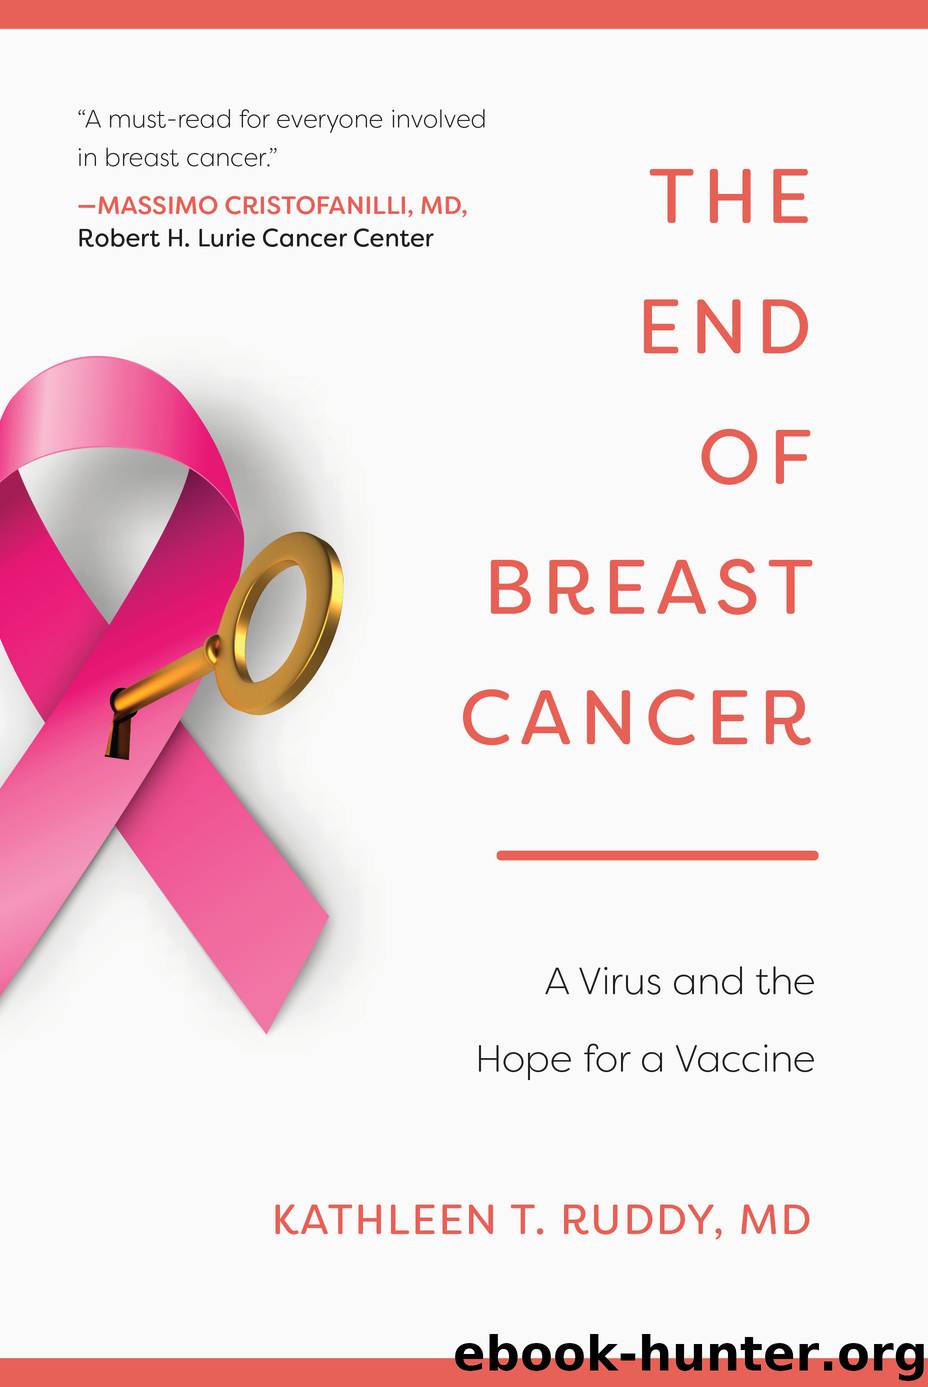 The End of Breast Cancer by Kathleen T. Ruddy MD